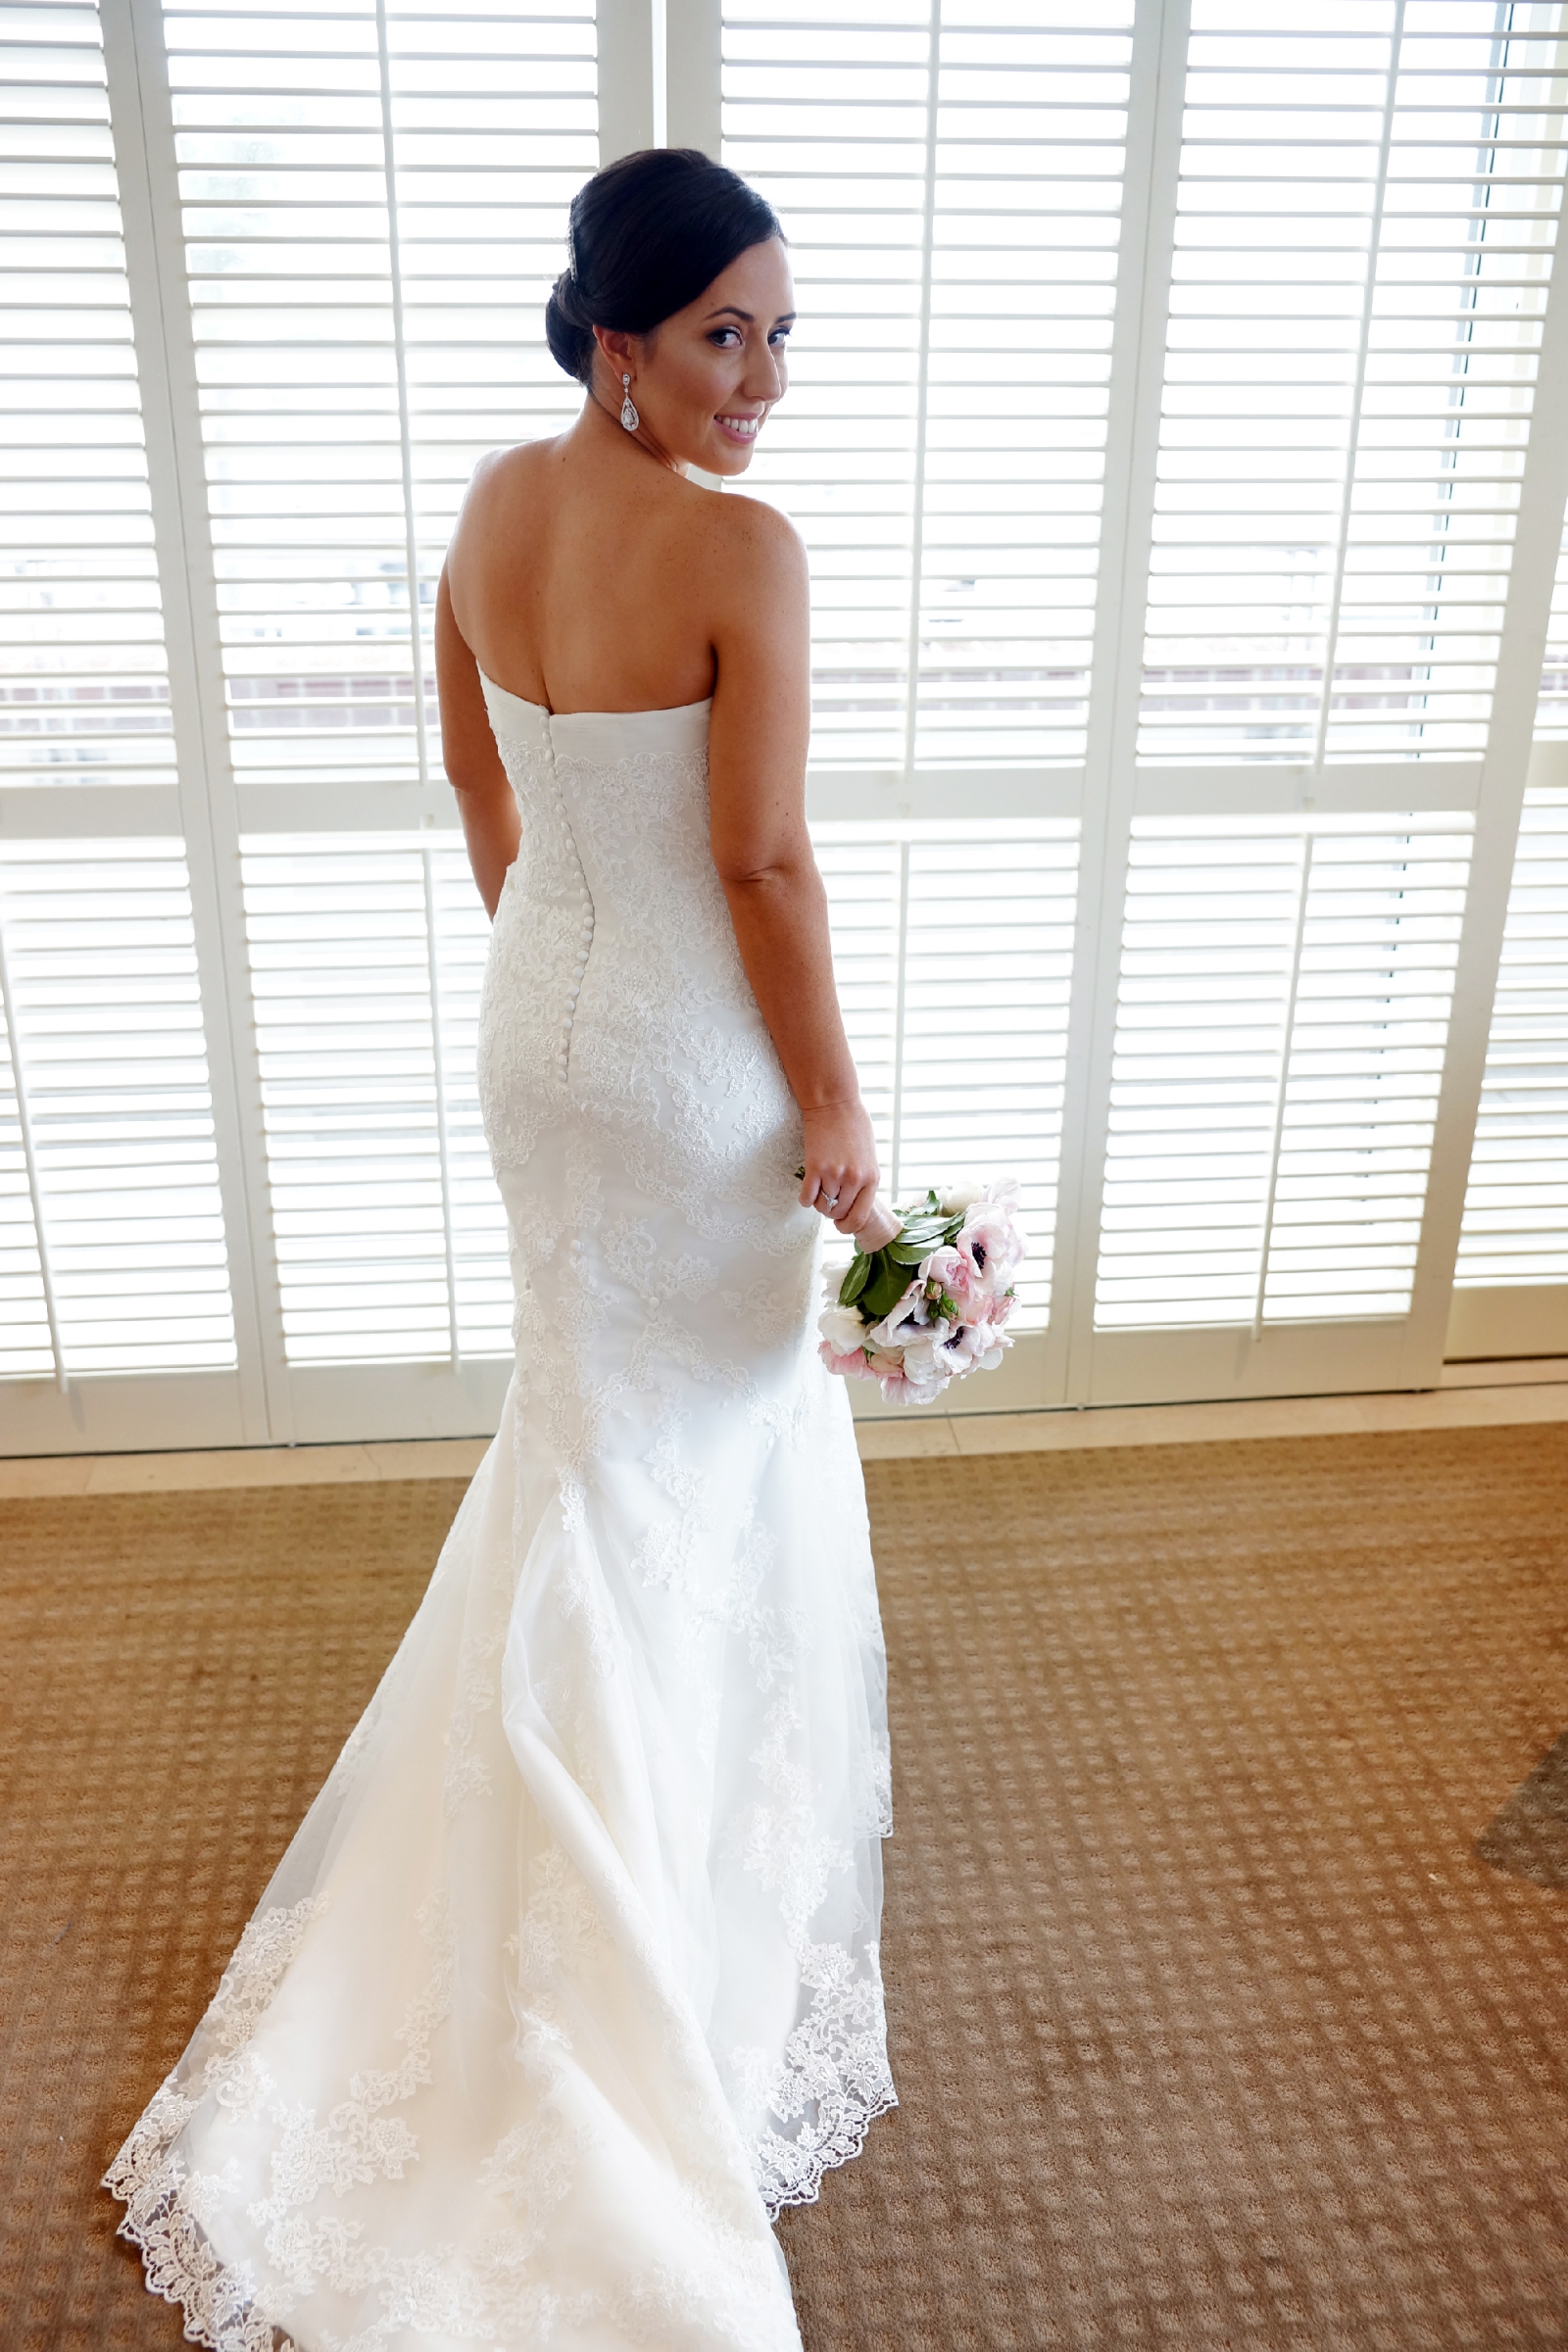 Best La Sposa Mullet Wedding Dress of the decade The ultimate guide 